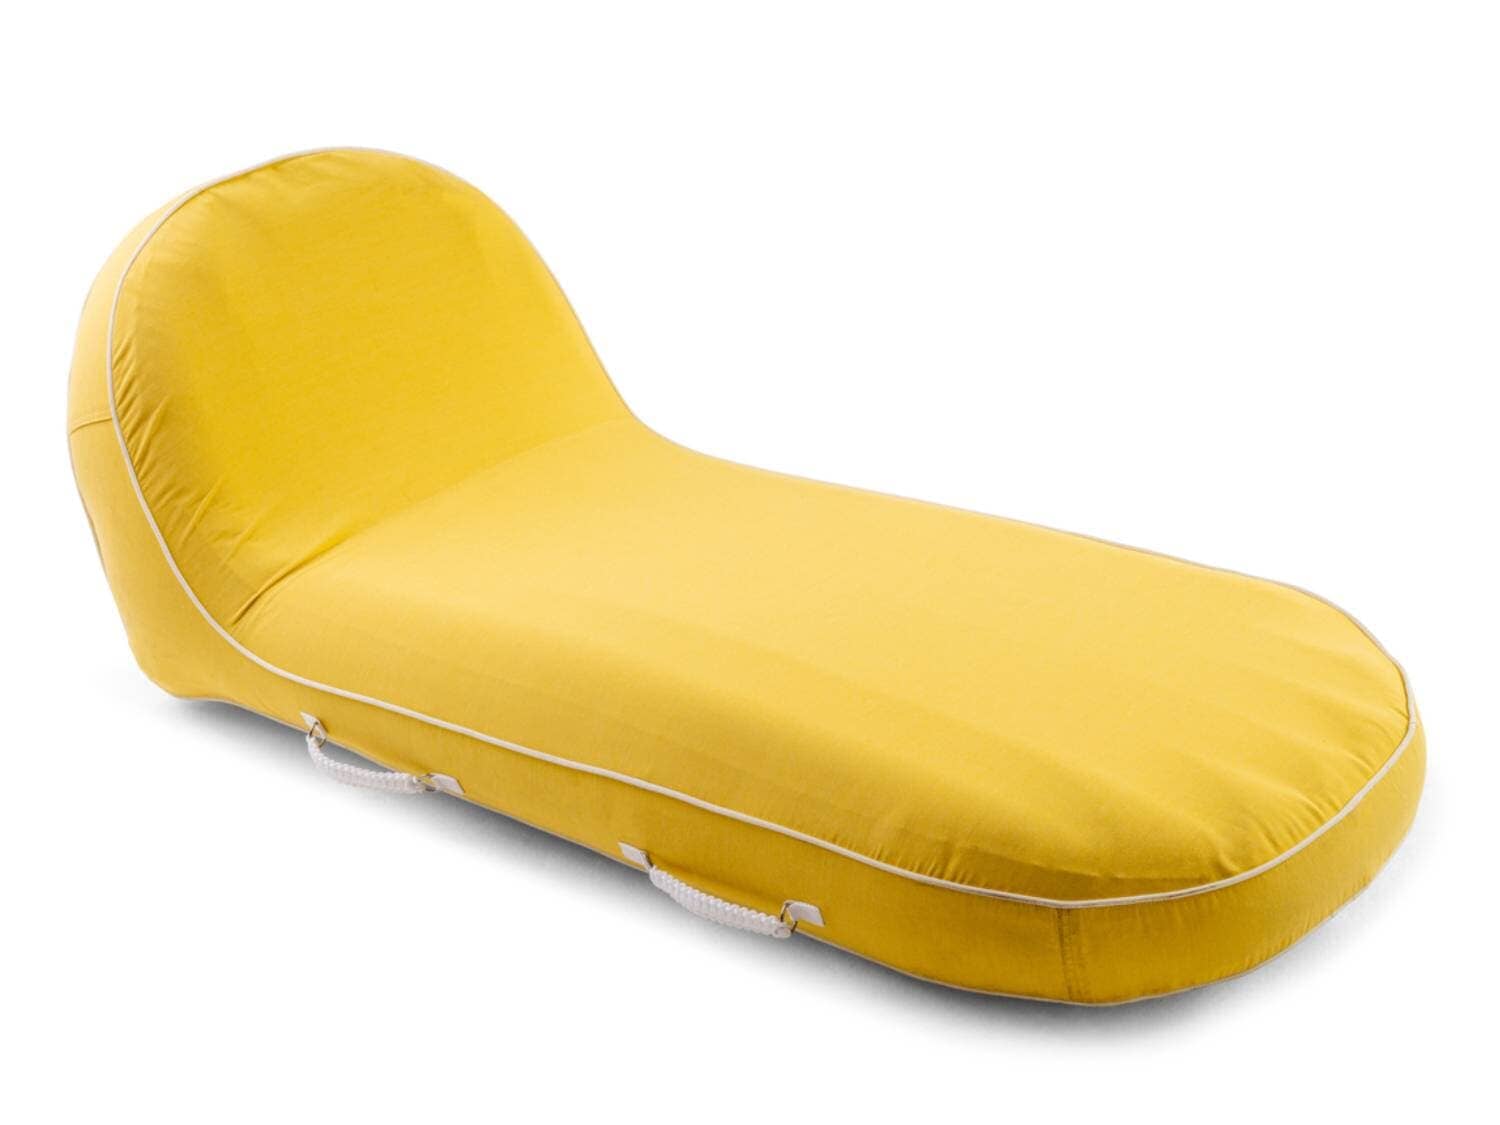 The Pool Lounger - Rivie Mimosa Pool Lounger Business & Pleasure Co Aus 